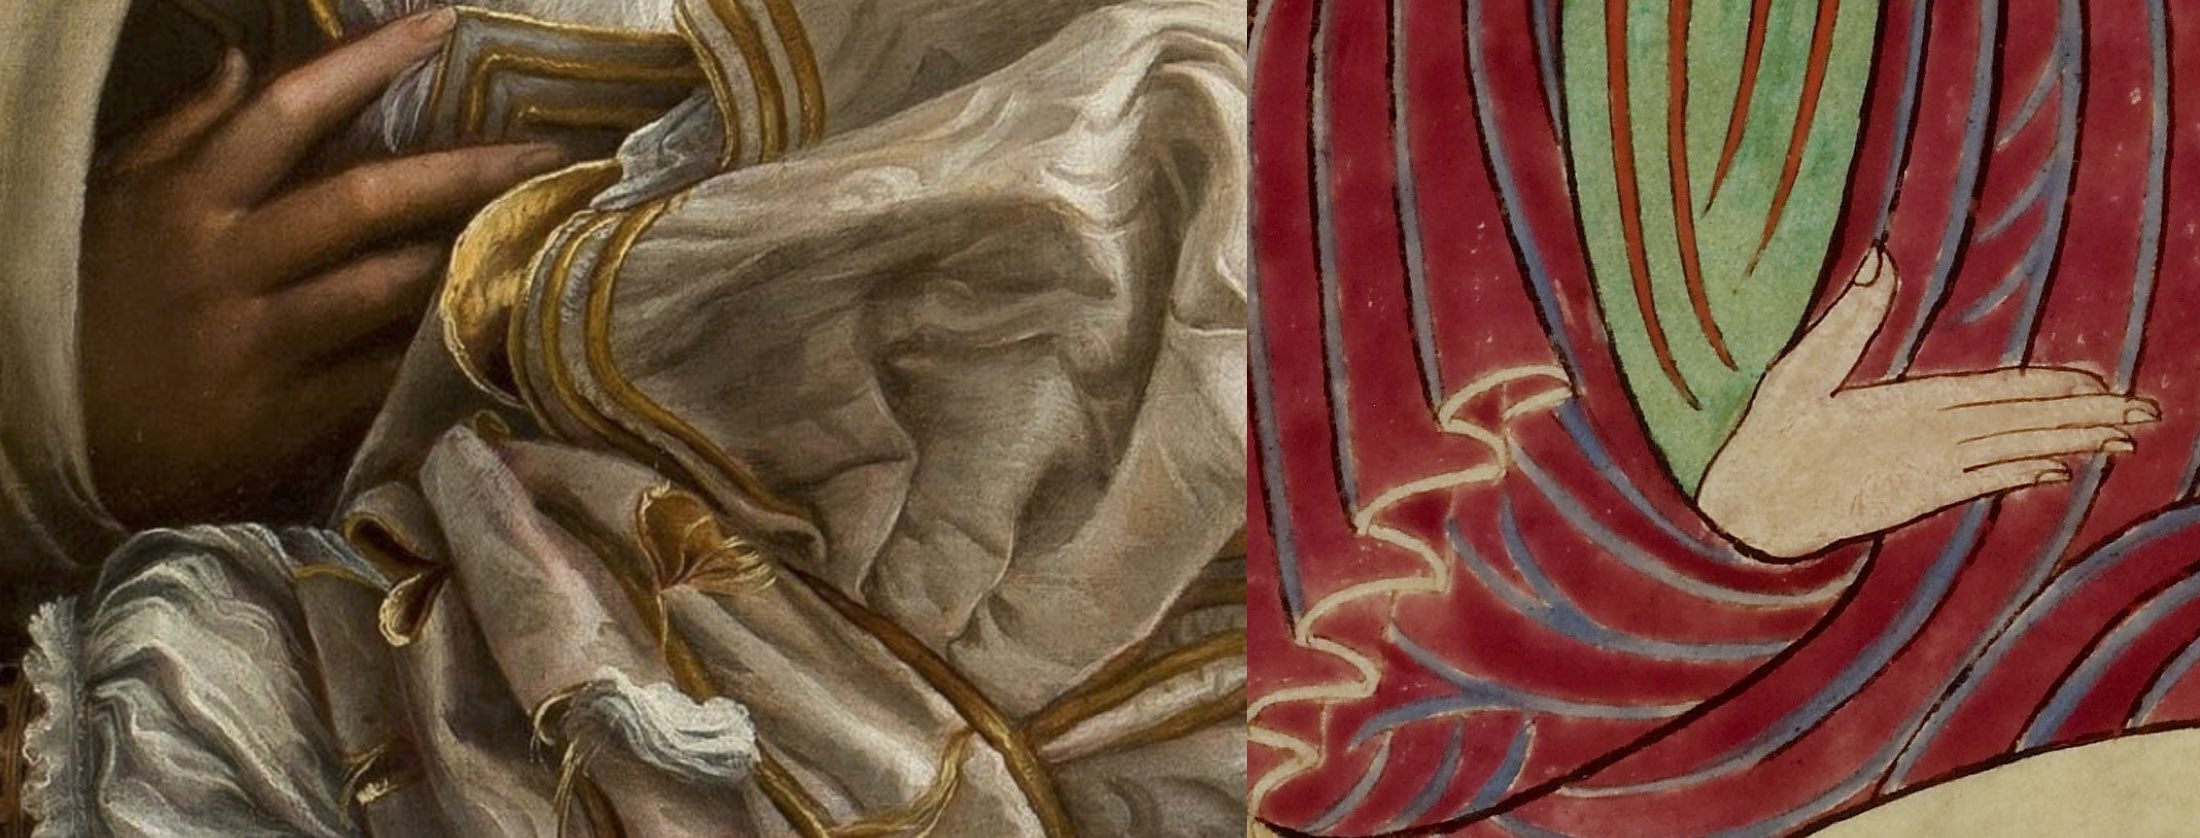 Details of the sleeve. left: Raphael, La Donna velata, 1514-15, oil on canvas, 82 x 60.5 cm (Palazzi Pitti, Florence); right: St John the Evangelist in the Lindisfarne Gospels (London, British Library, MS Cotton Nero D IV, f. 209v).